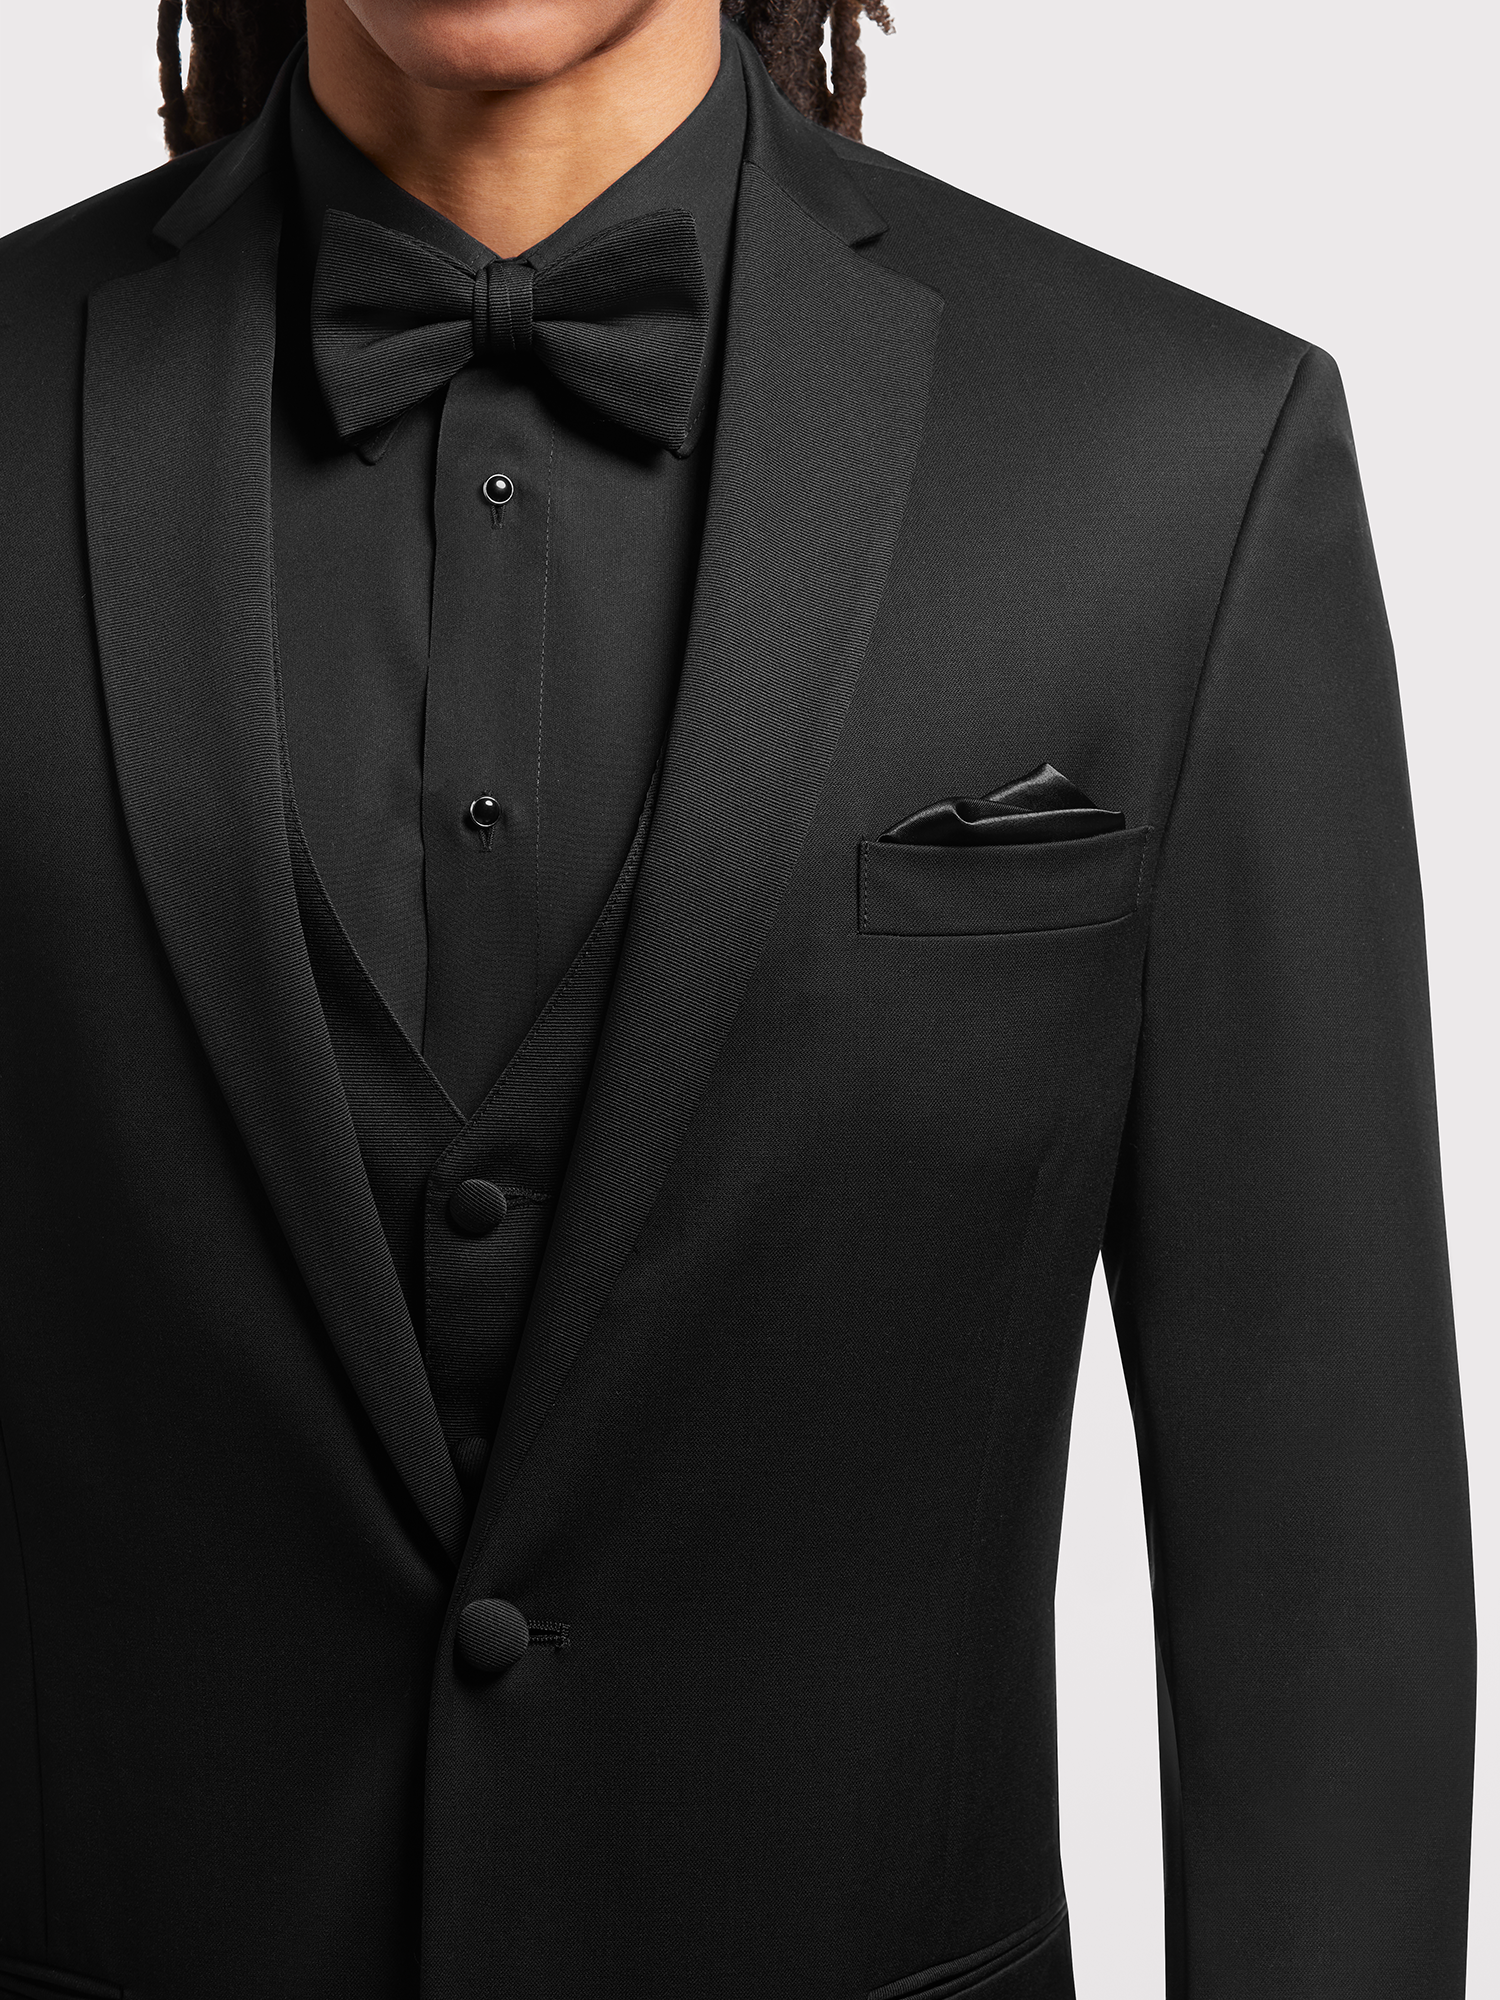 2023 Latest Navy Blue Slim Fit Skinny Tuxedo Suit With Black